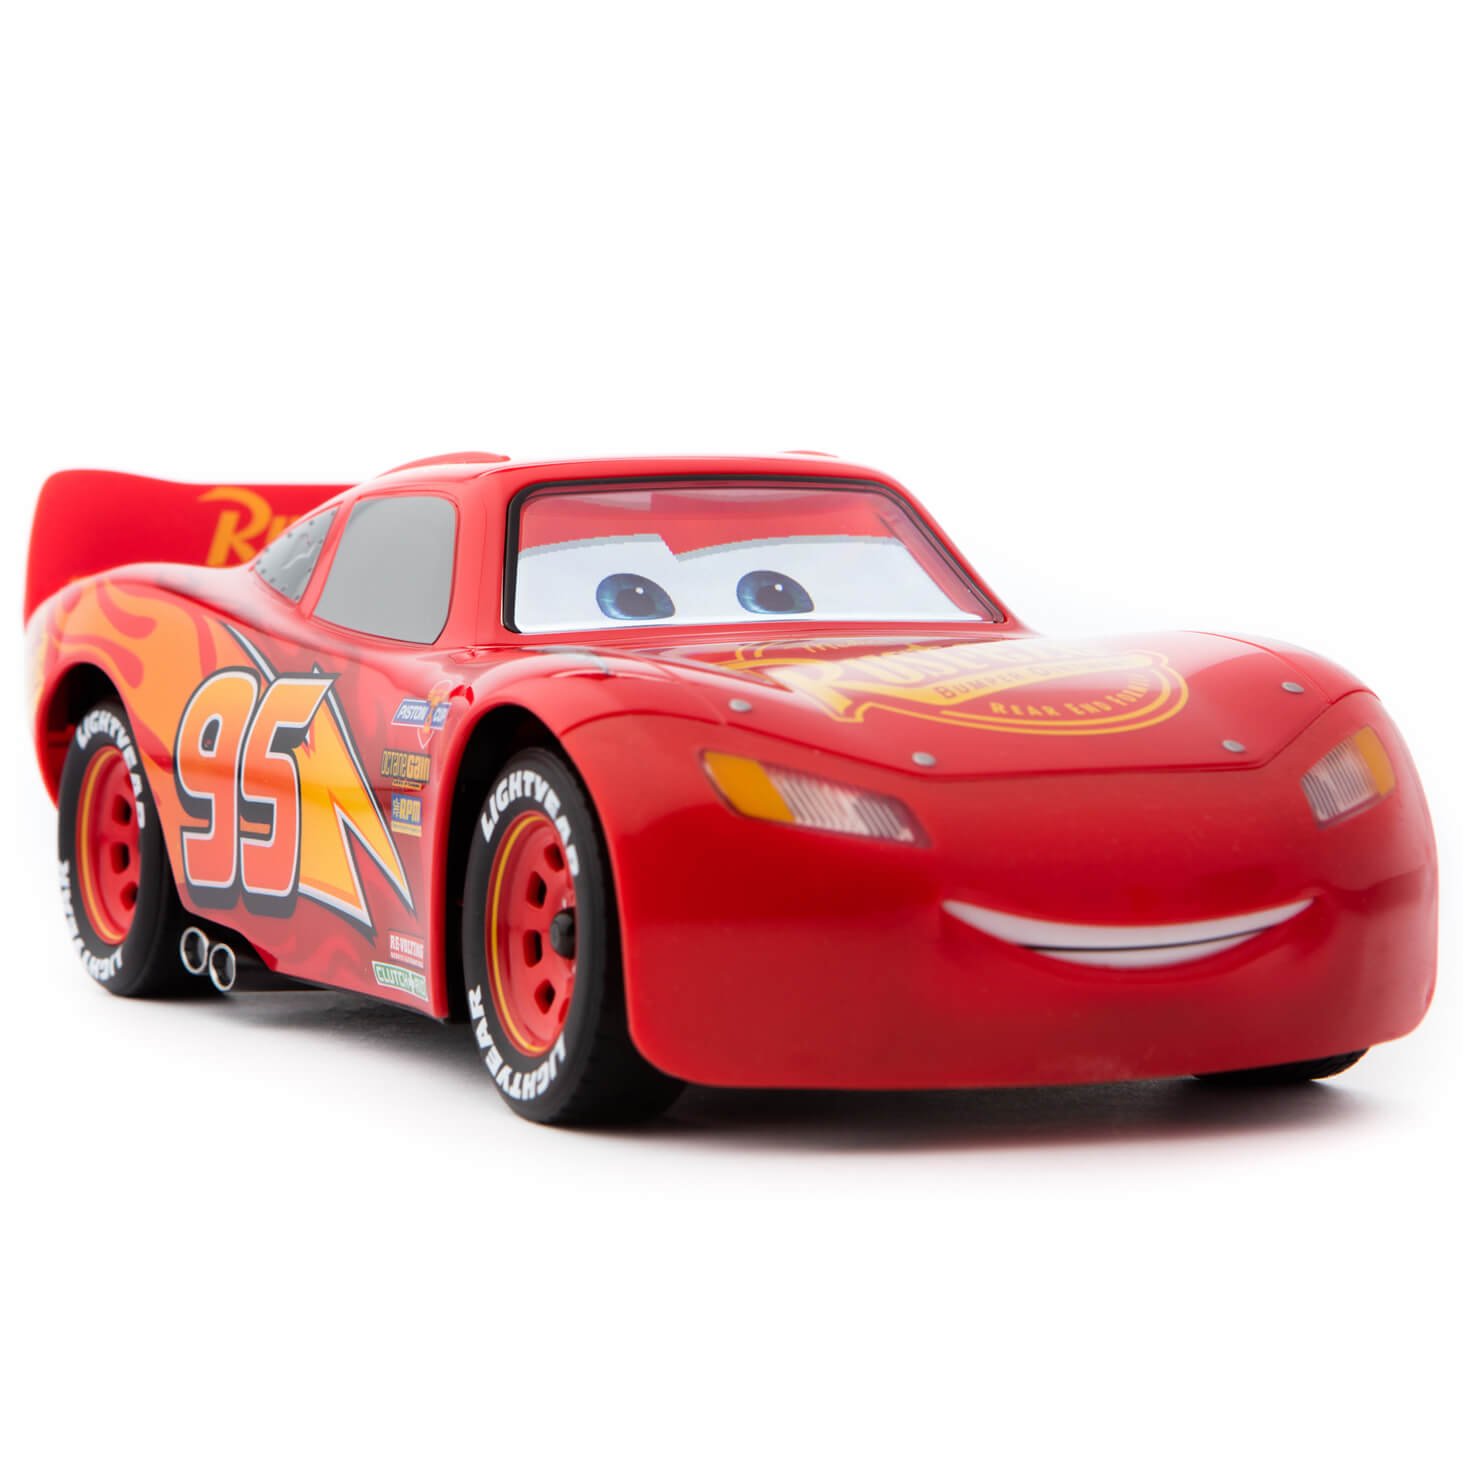 Cars 3 Will be Lightning McQueen's Fight Against the Future